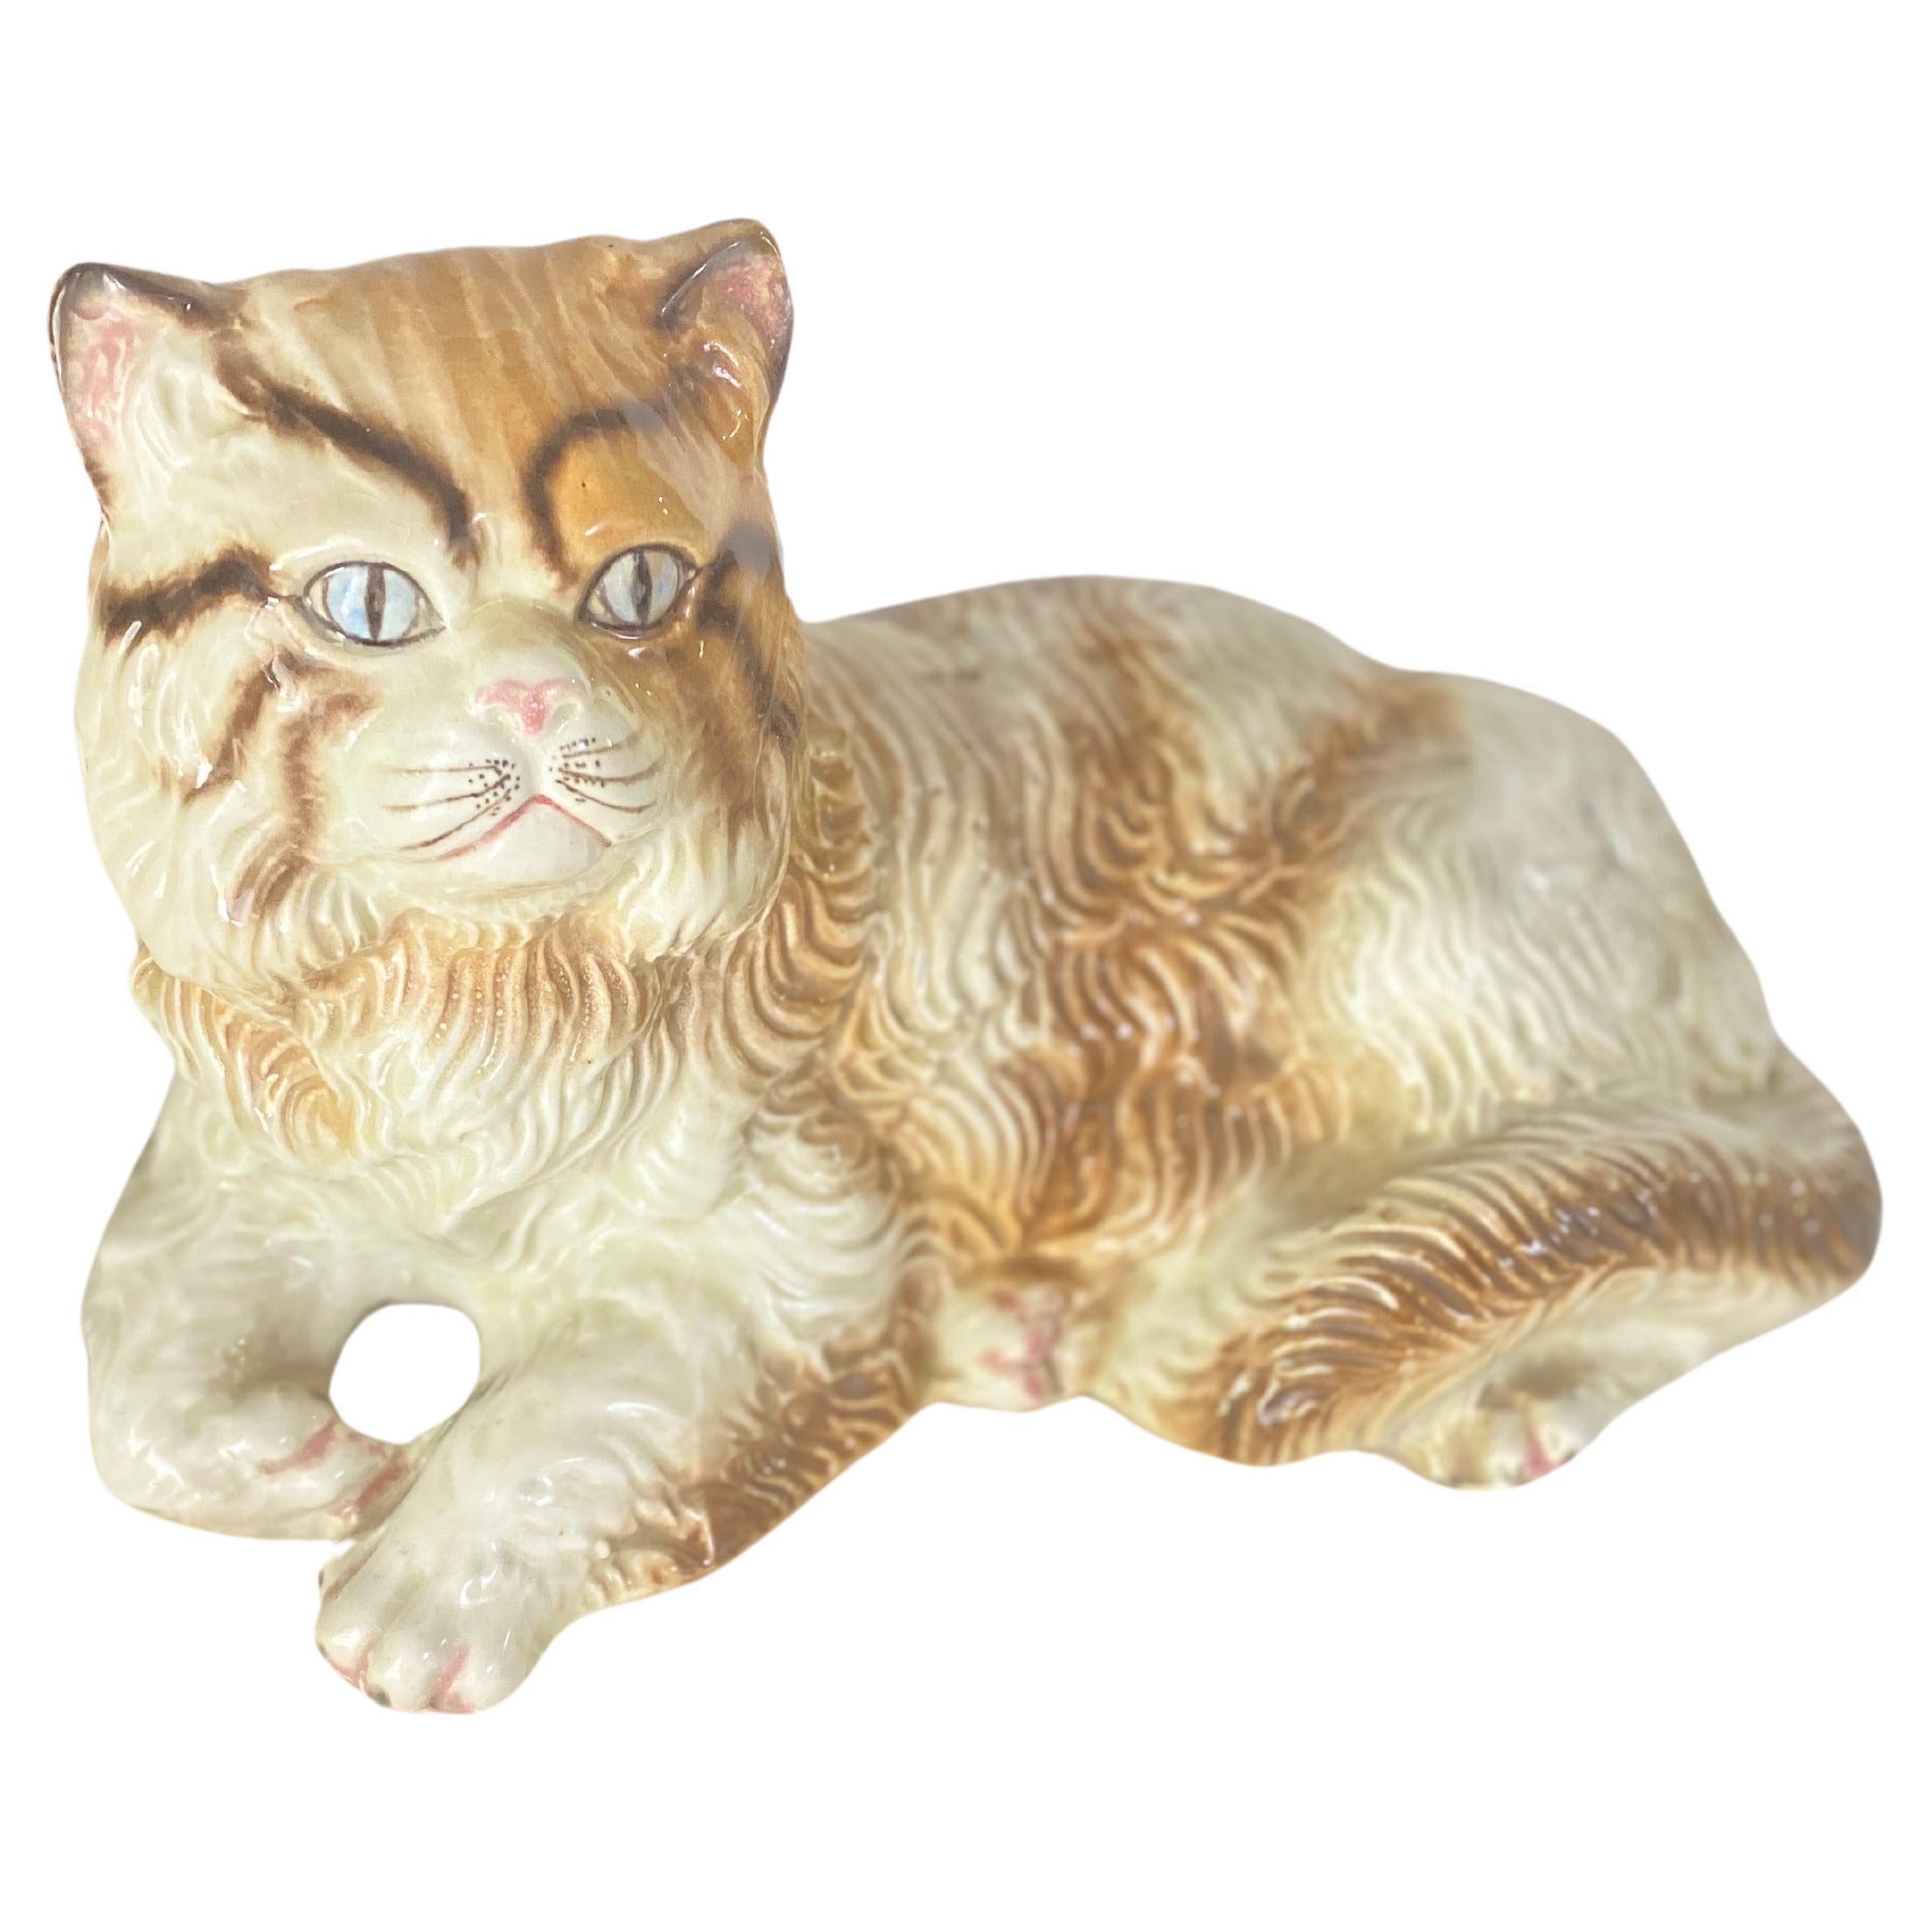 This is a vintage terracotta from Italy representing a seated Cat. You can see realism in the mouth the eyes and the teeth.
The colors are Brown white  and blue. This sculpture has been realised in the 1970s years.
